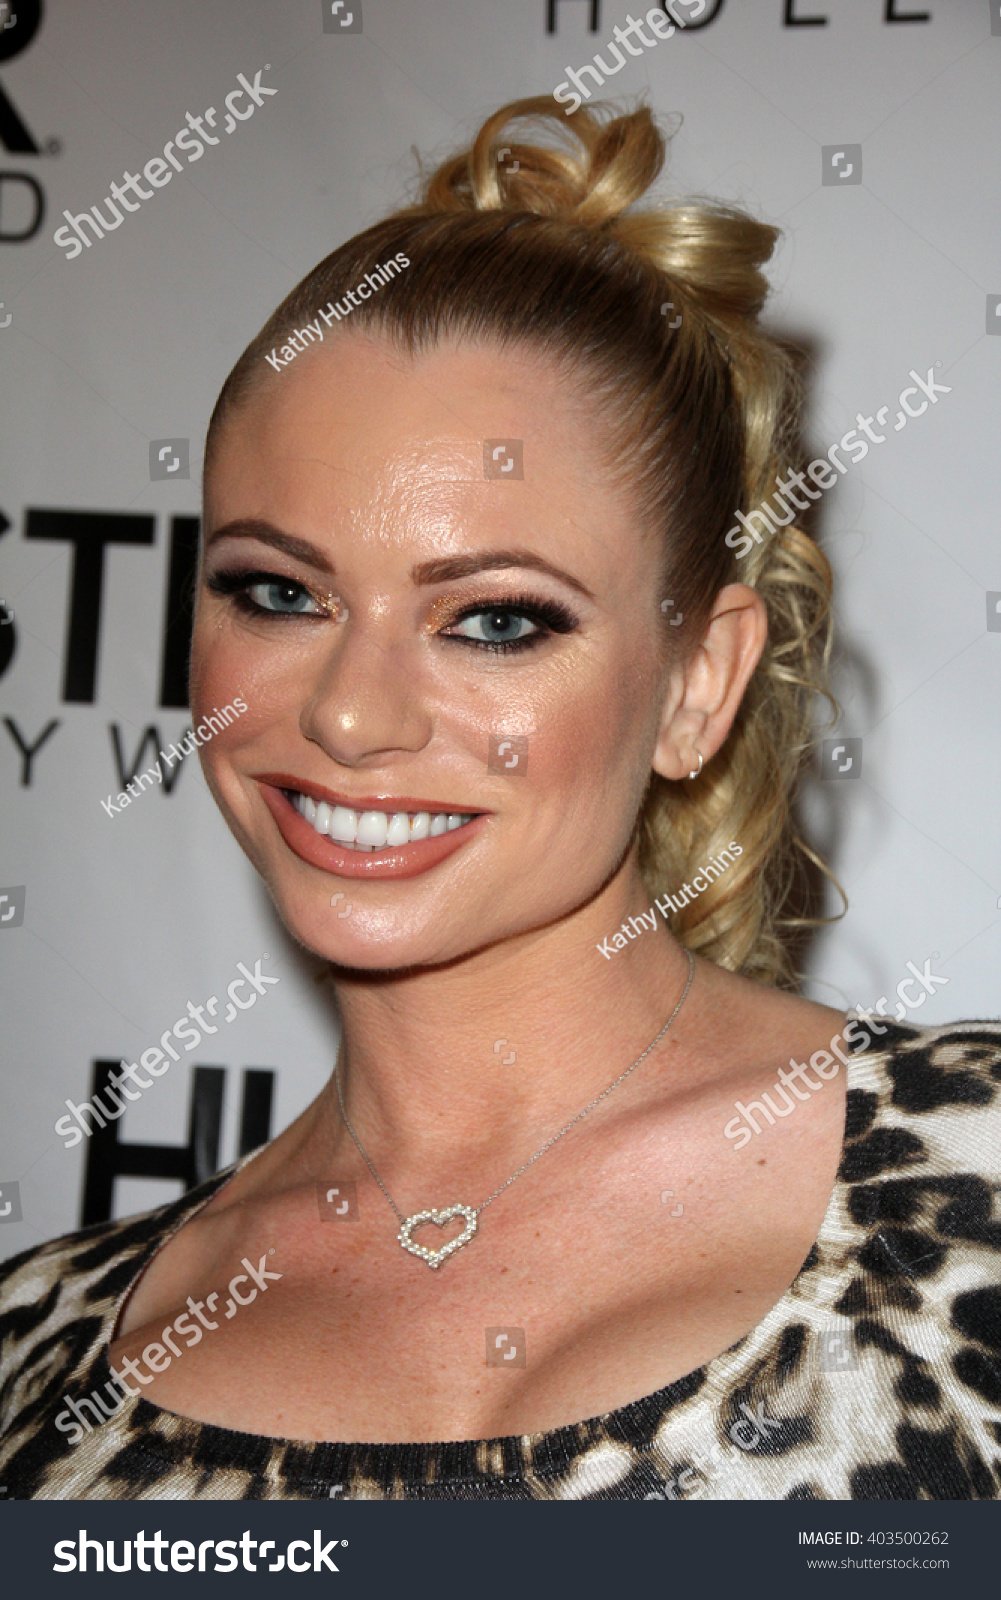 Briana Banks music, videos, stats, and photos | Last.fm